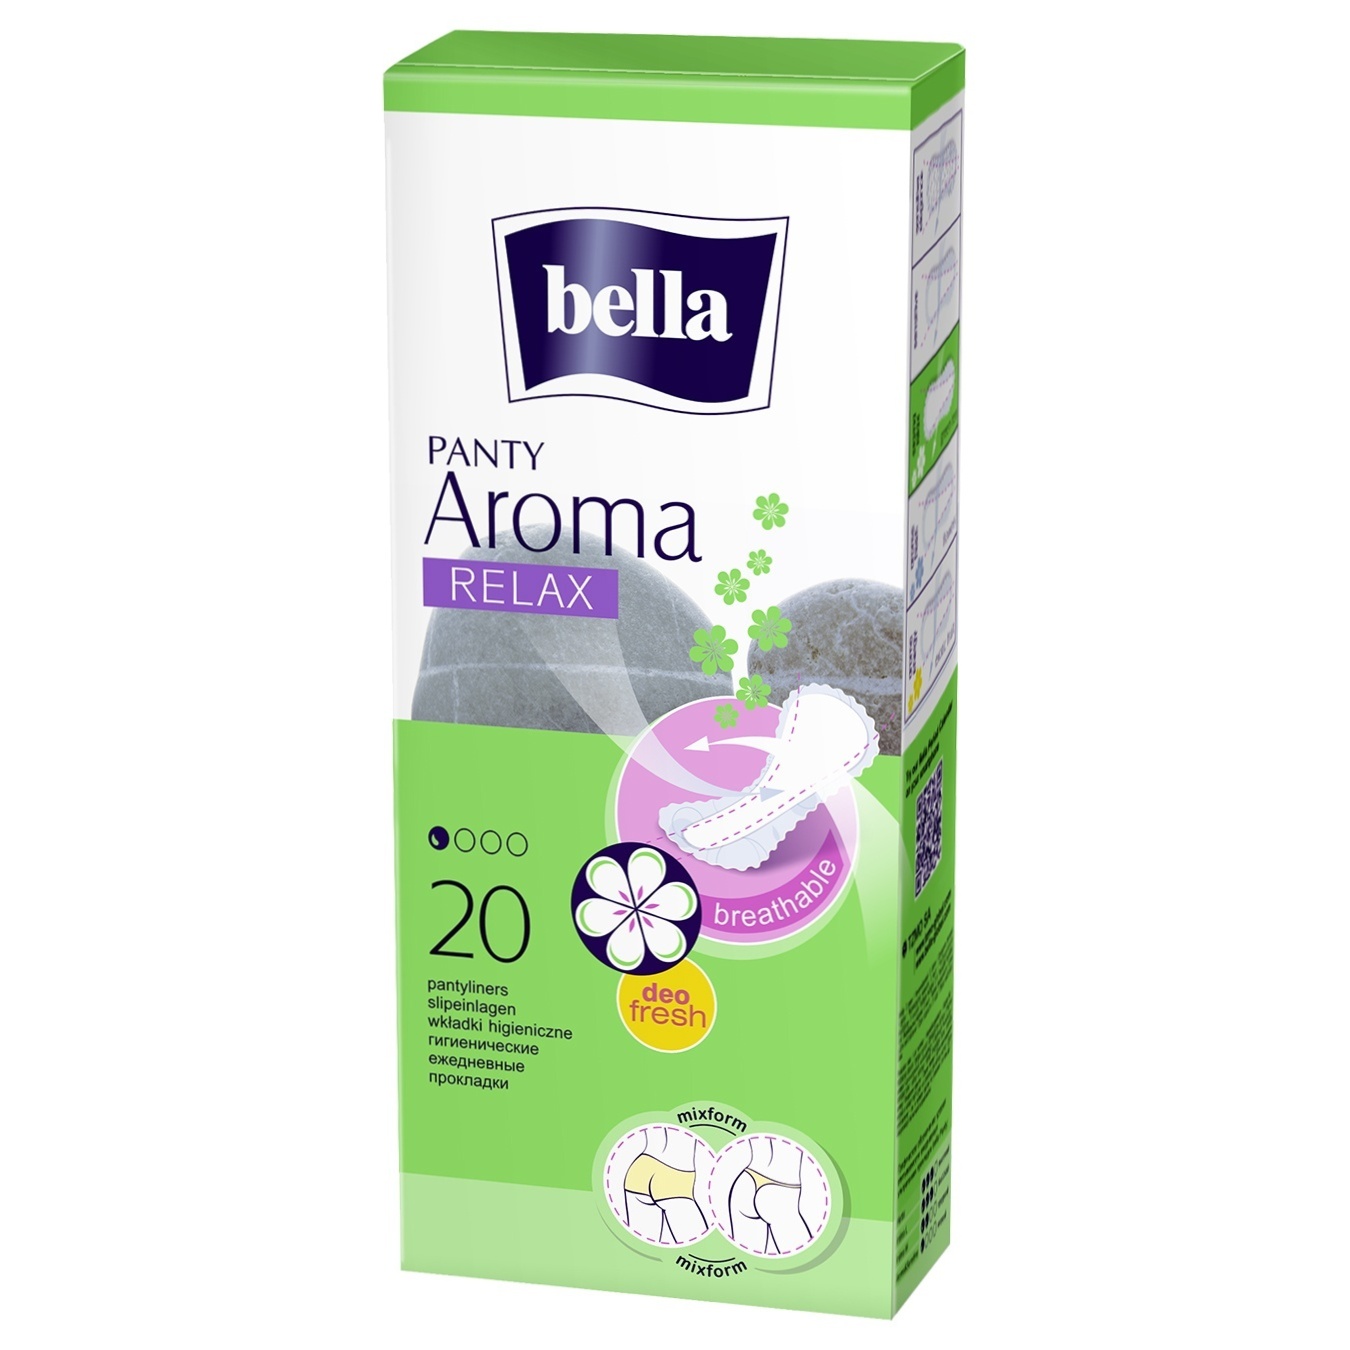 Daily pads Bella Panty Aroma Relax 20 pcs